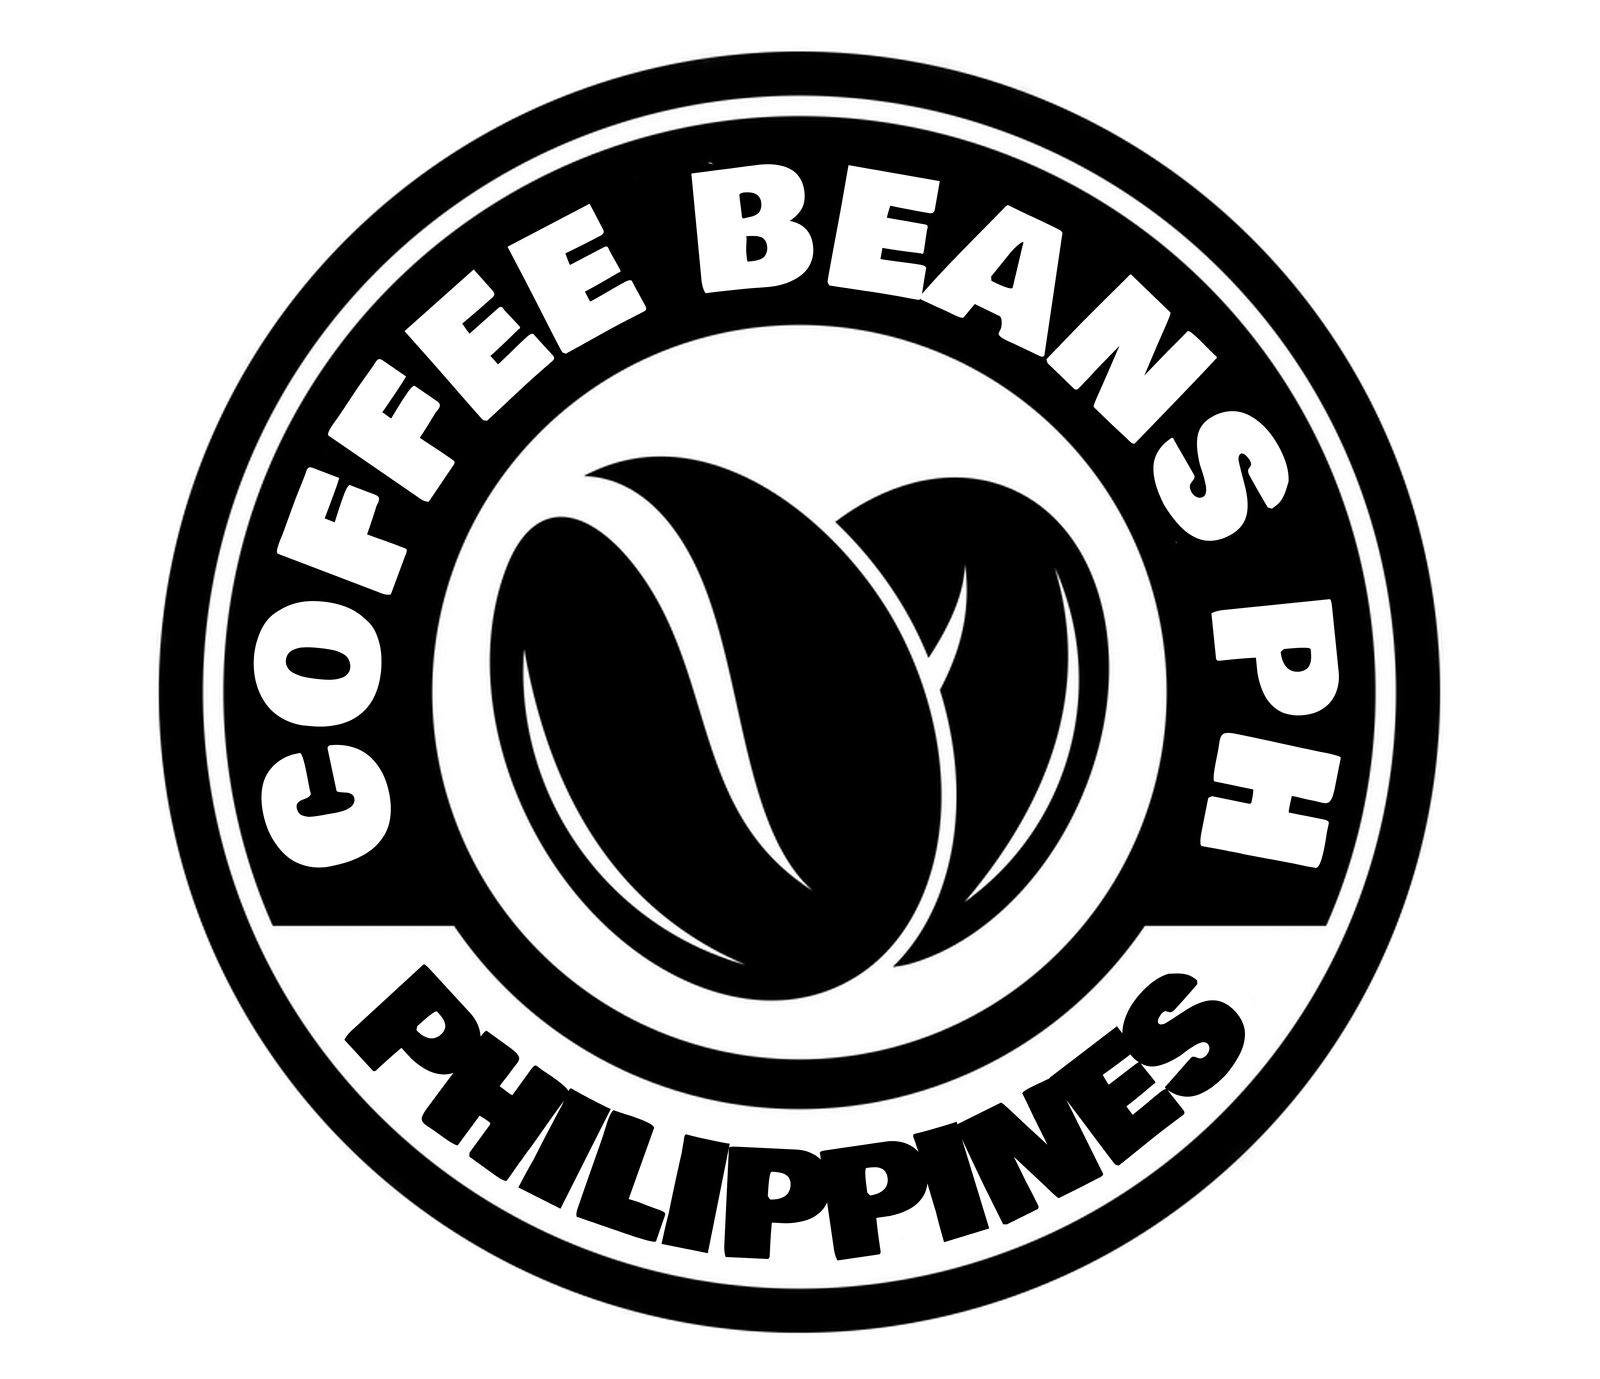 Coffee Beans PH | Home of Philippines Finest Coffees